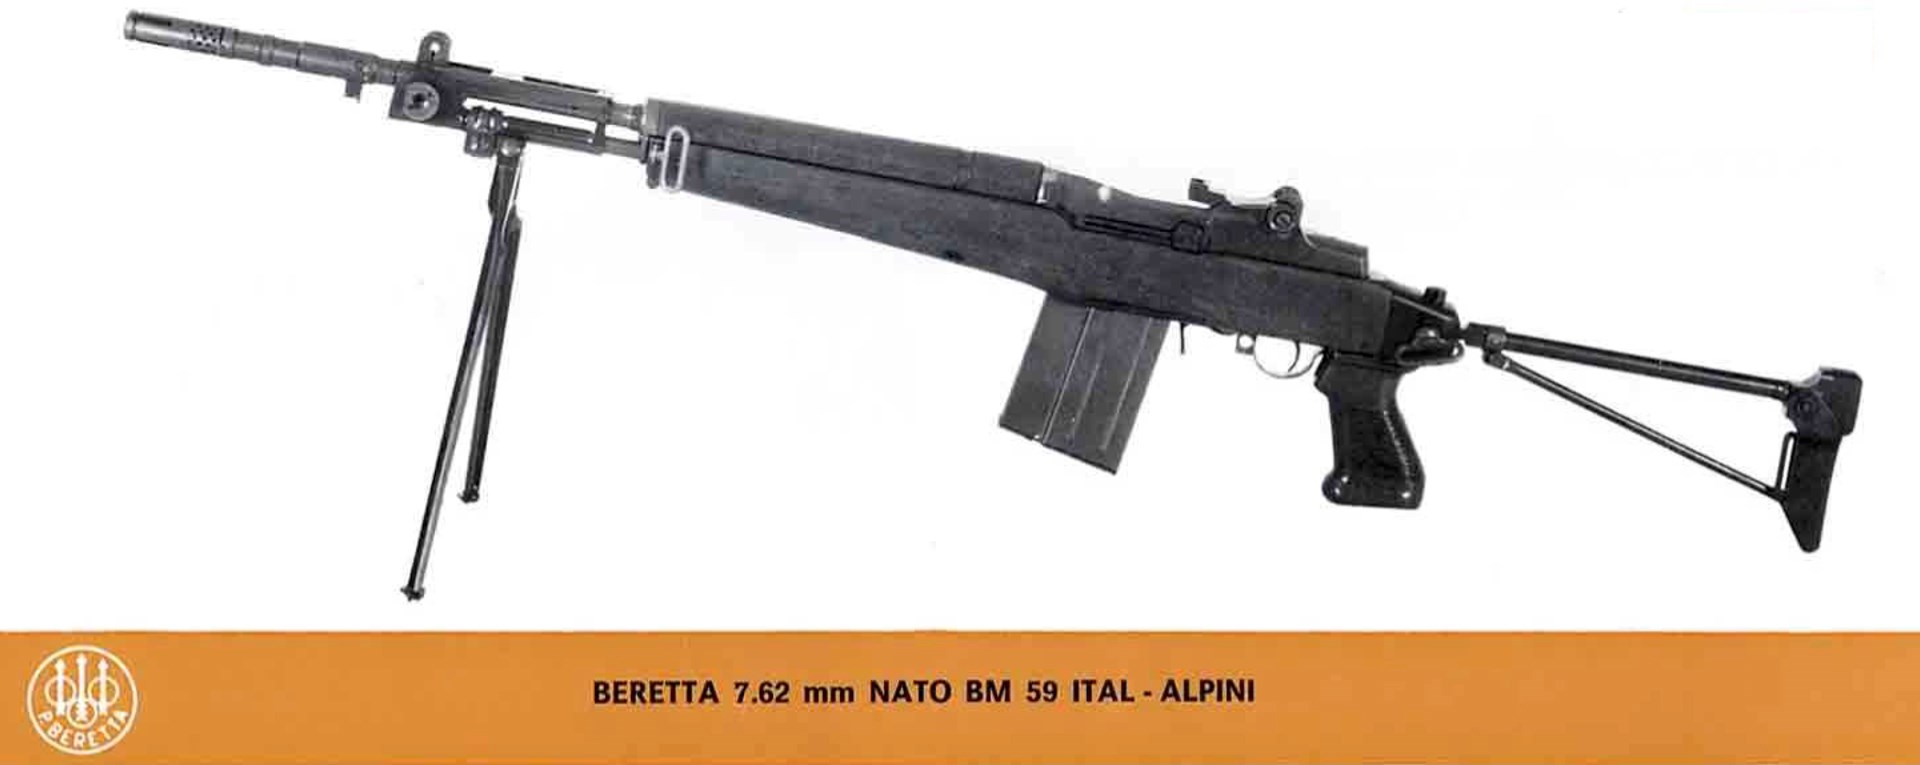 The entry for the BM-59 Alpini that appeared in the Beretta BM-59 sales literature.